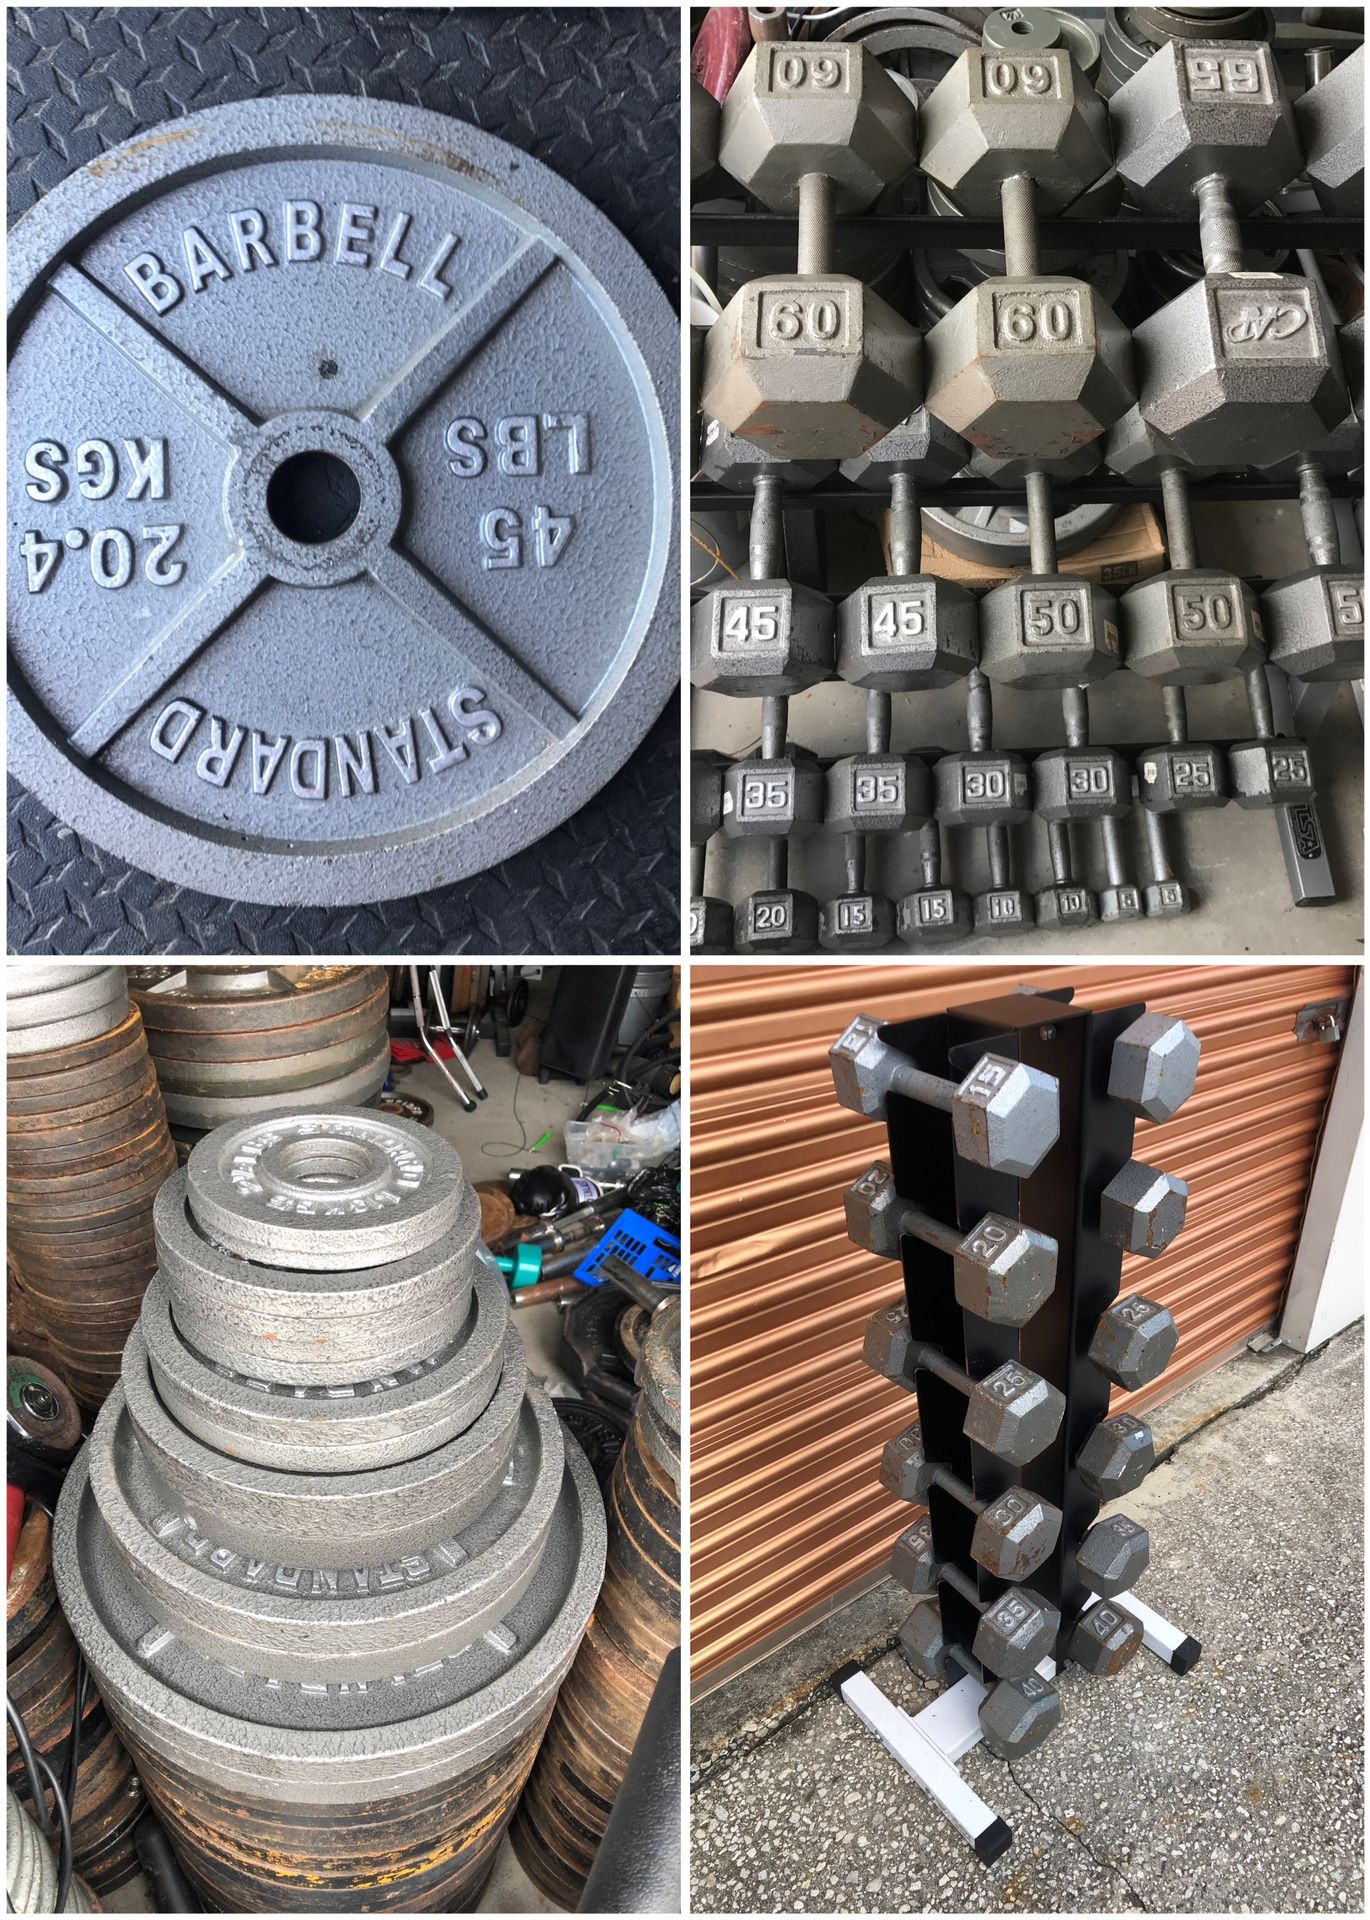 Dumbbells, Olympic Weight Plates, Trees, Racks, Barbells, Rubber, Bumpers, Benches